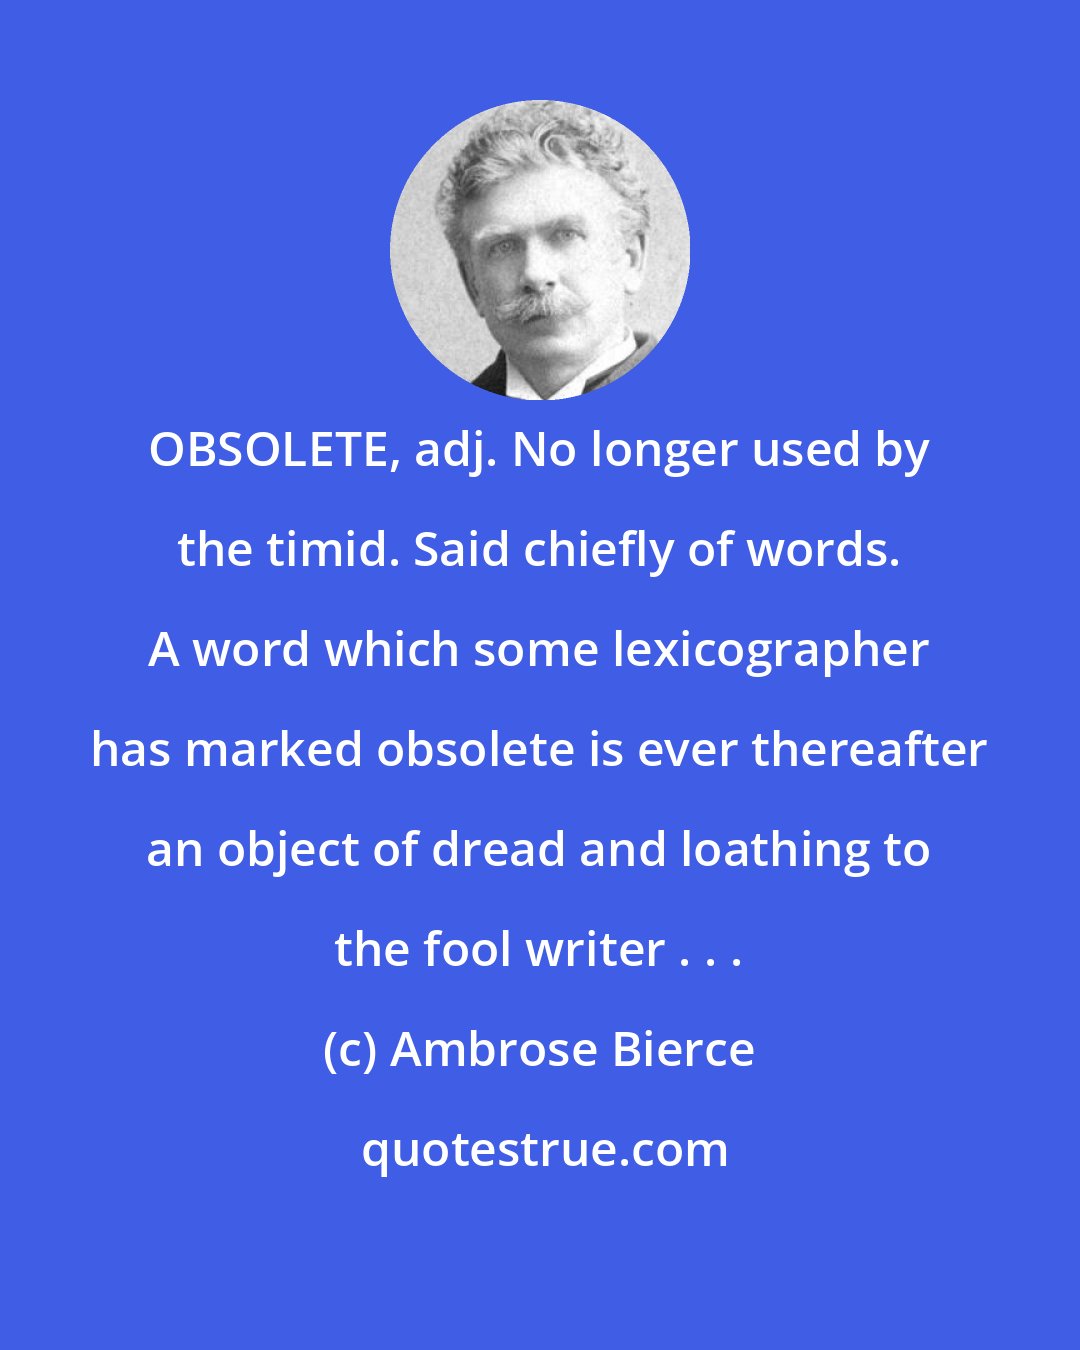 Ambrose Bierce: OBSOLETE, adj. No longer used by the timid. Said chiefly of words. A word which some lexicographer has marked obsolete is ever thereafter an object of dread and loathing to the fool writer . . .